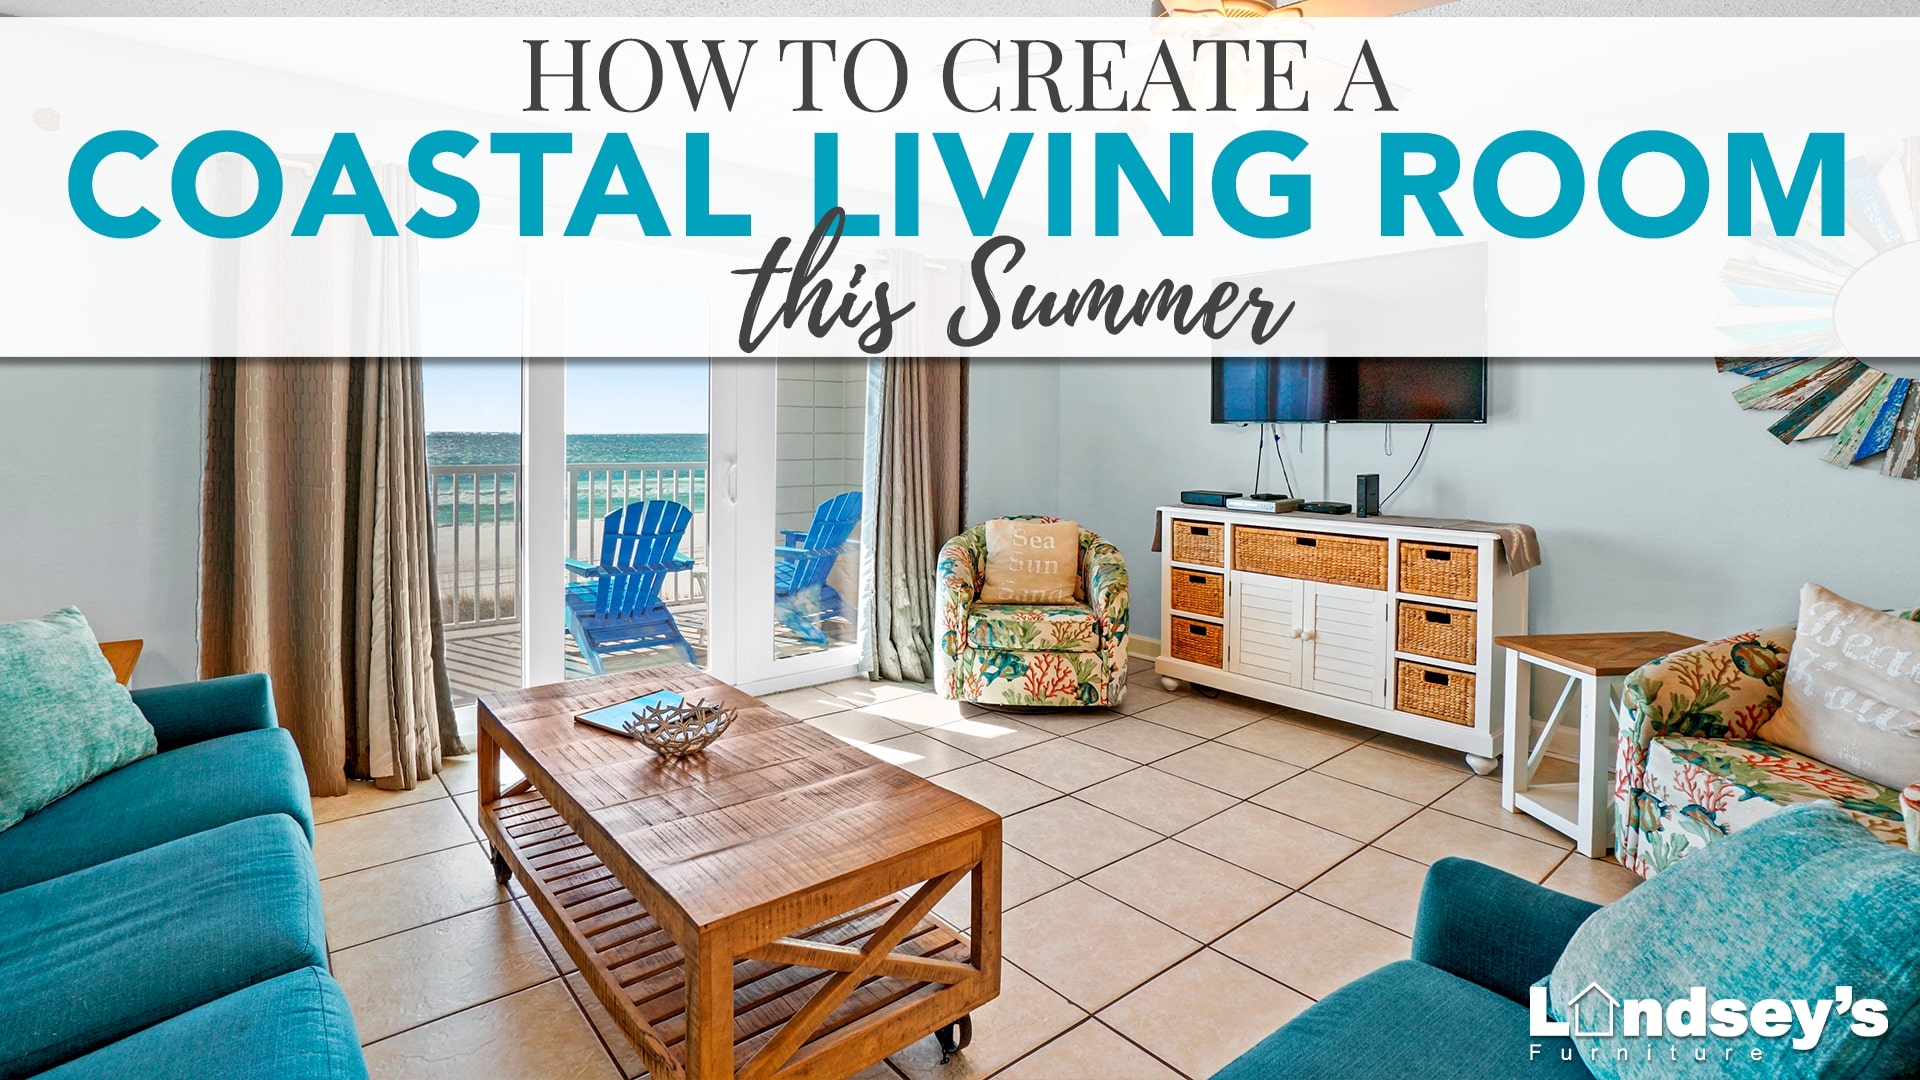 How to Create a Coastal Living Room Paradise this Summer